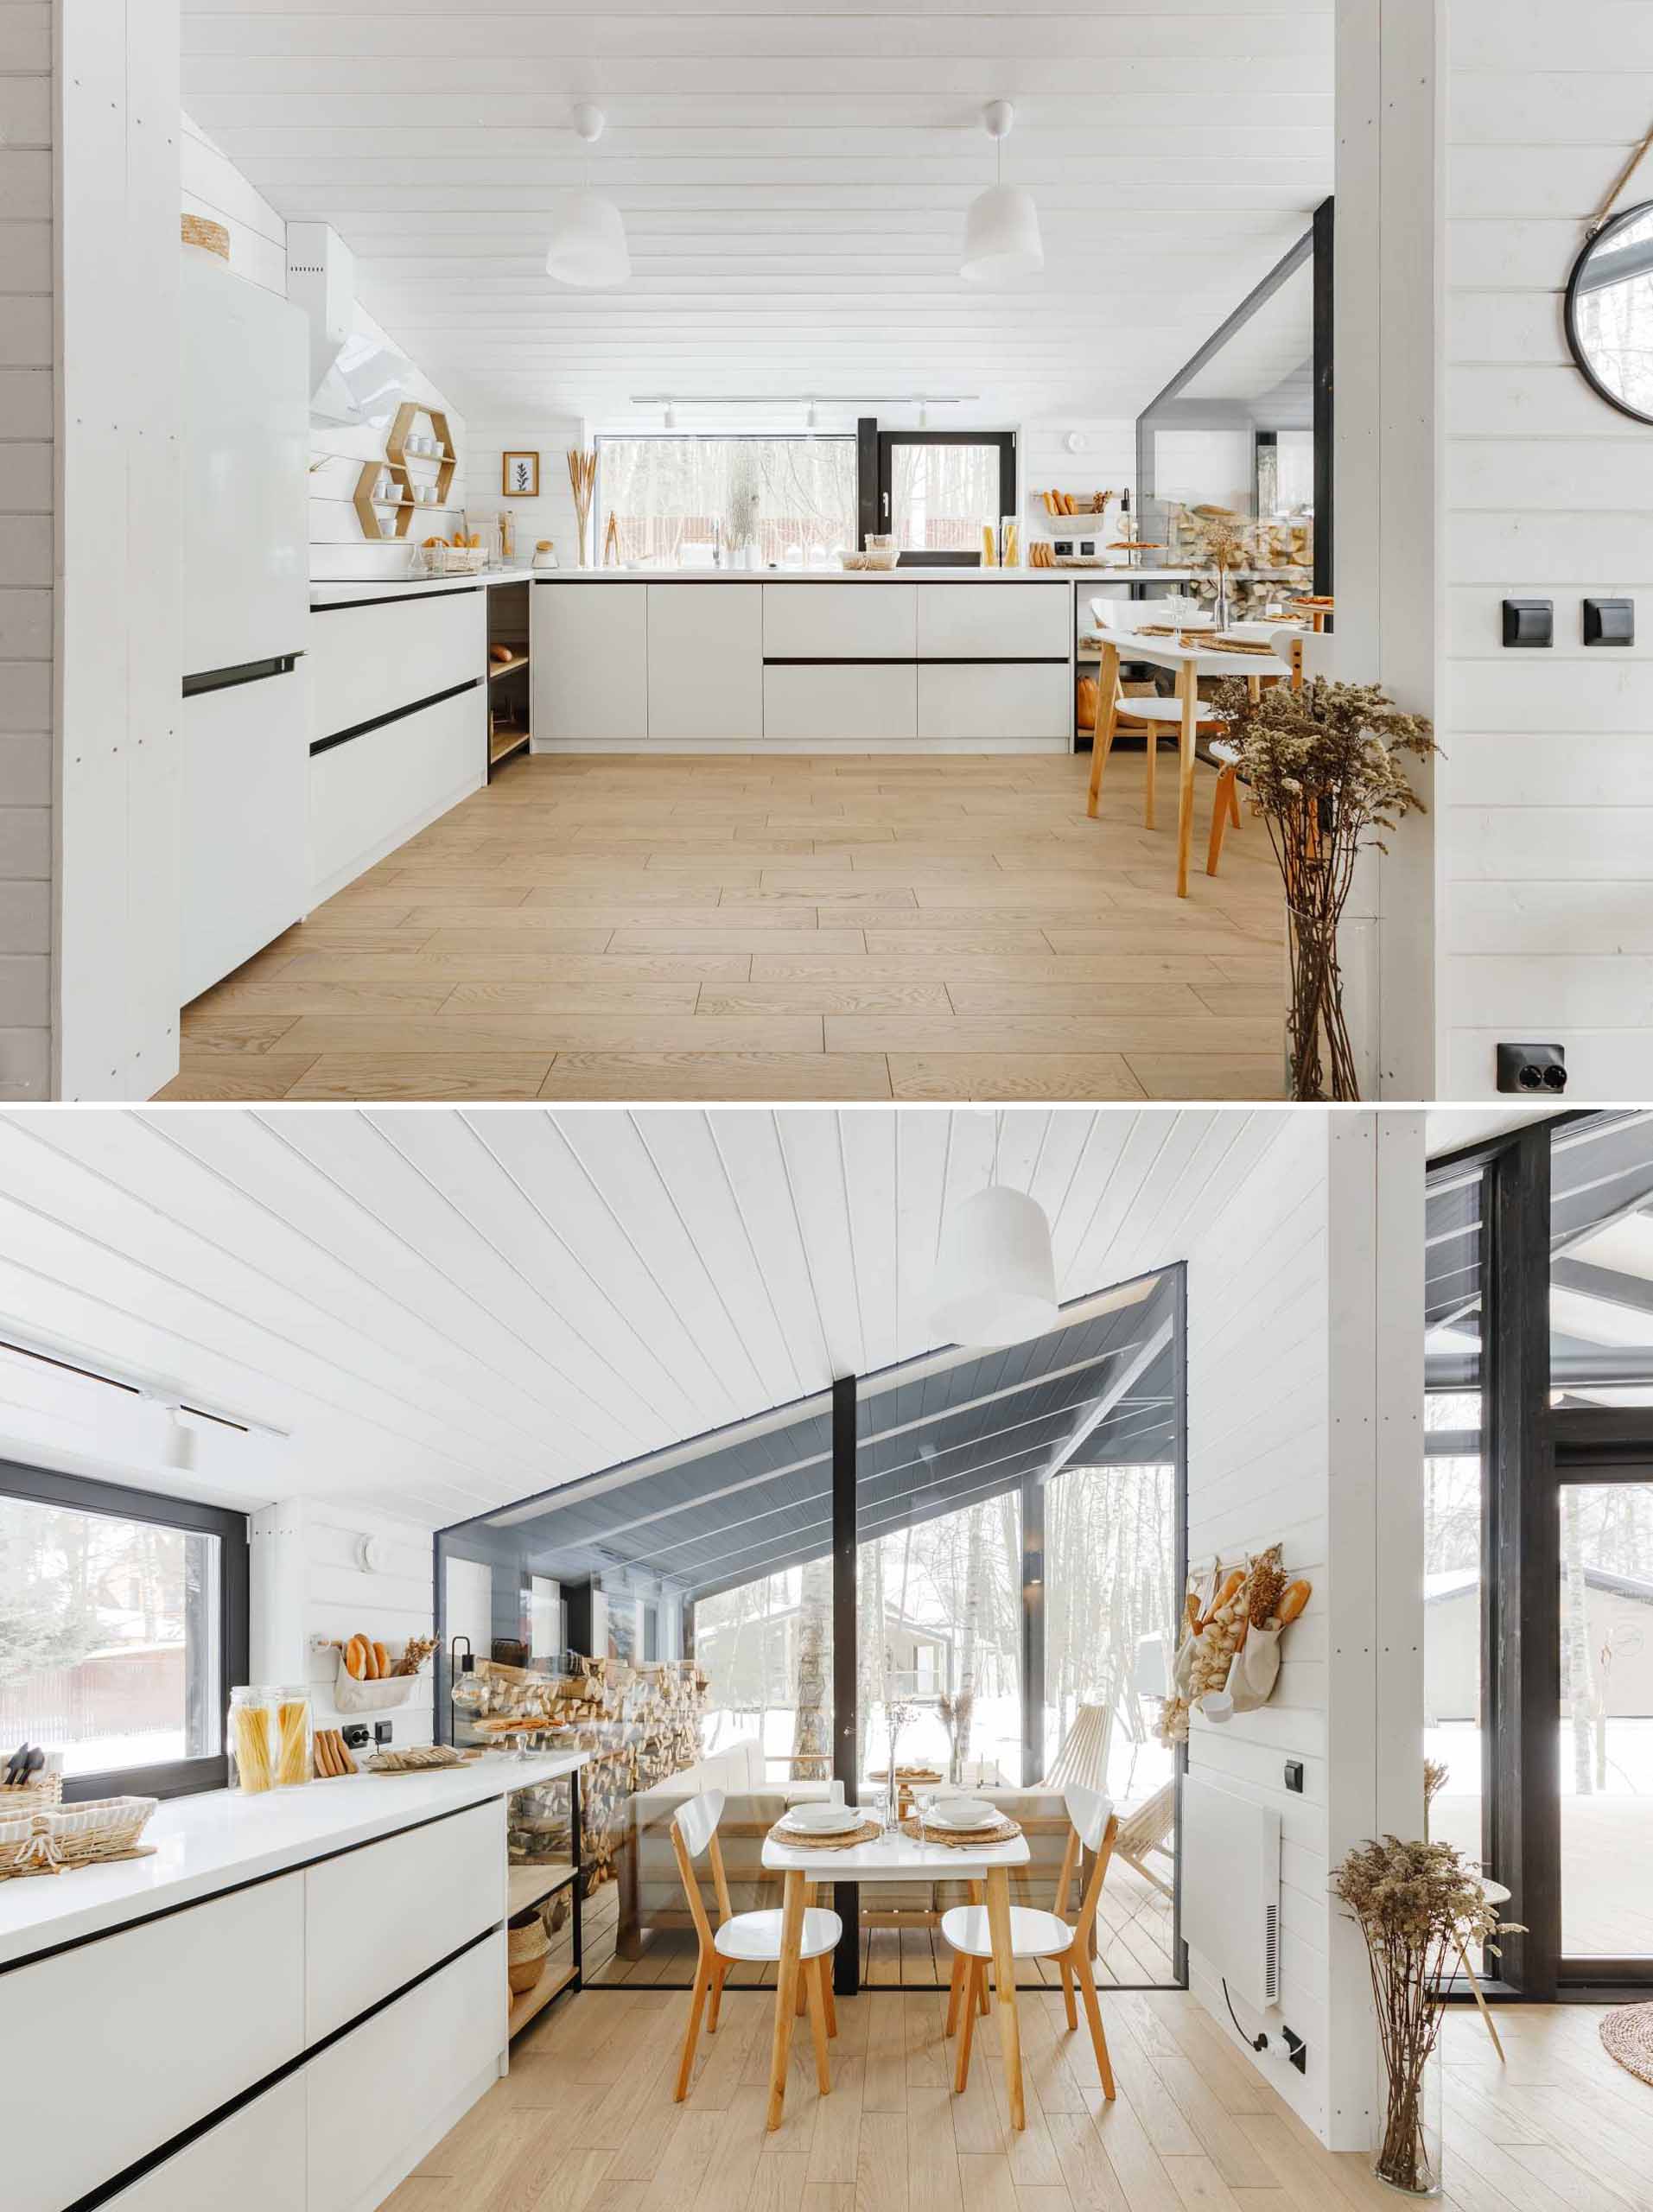 A modern kitchen with white cabinets, a wood floor, and a small breakfast nook.